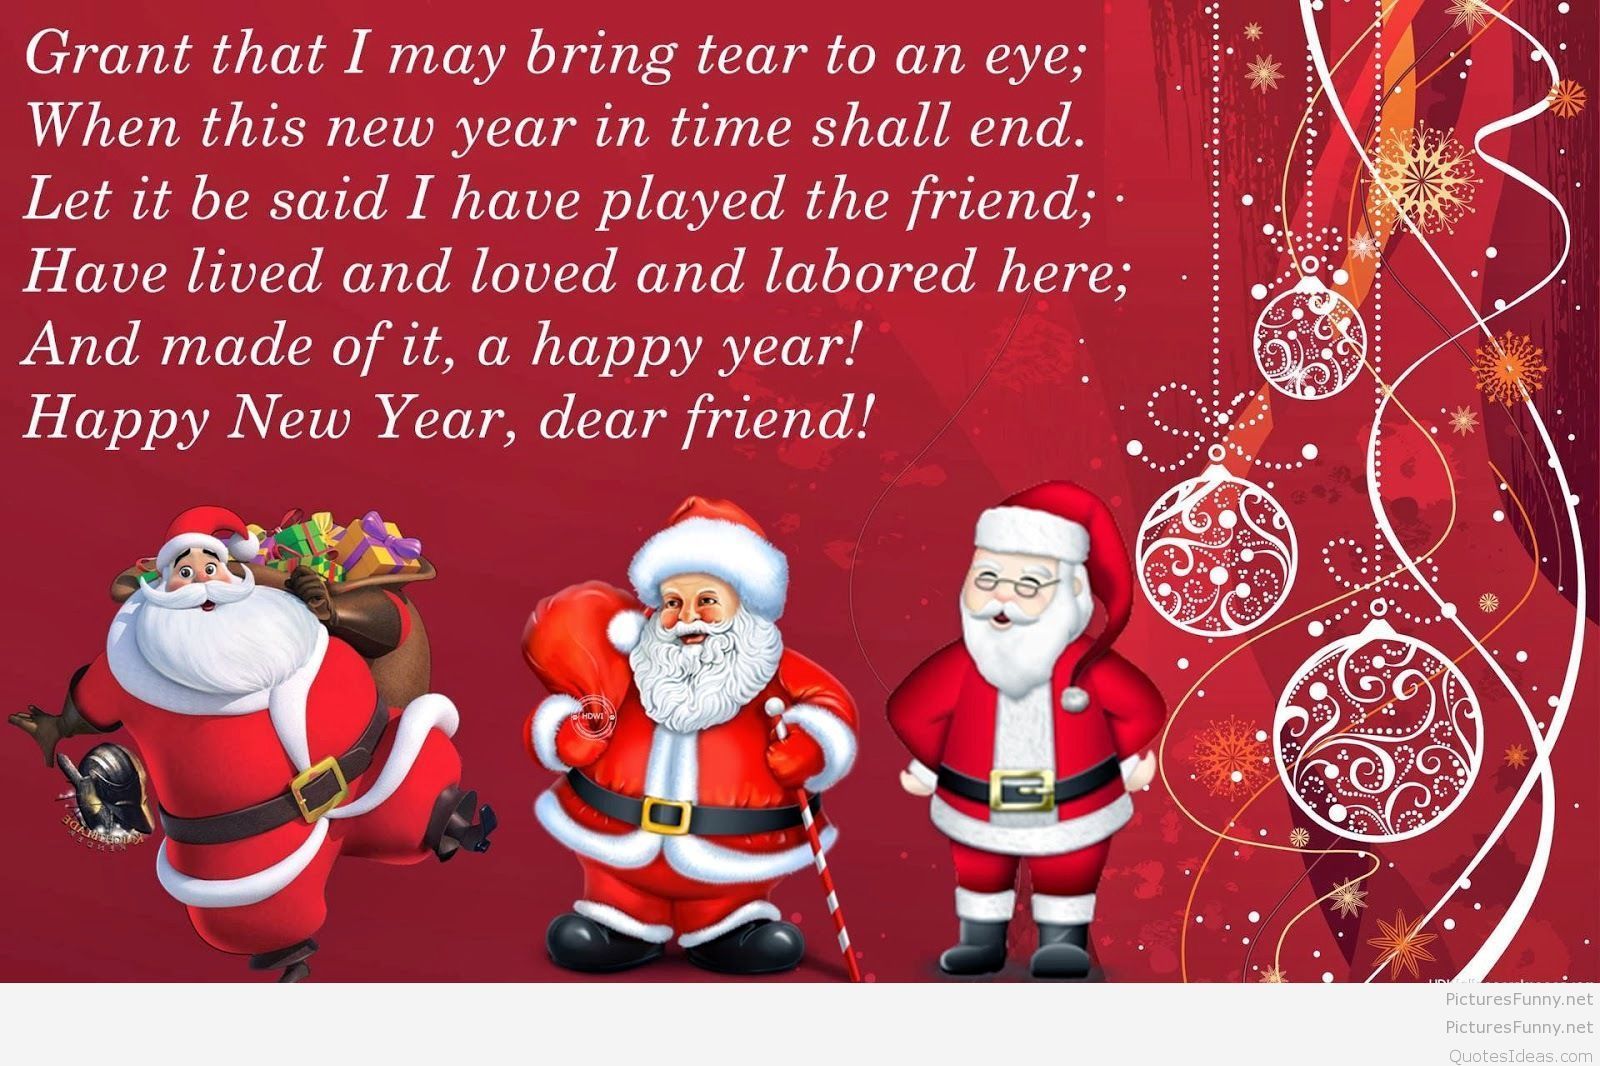 Merry Christmas quotes background and wallpaper 2015